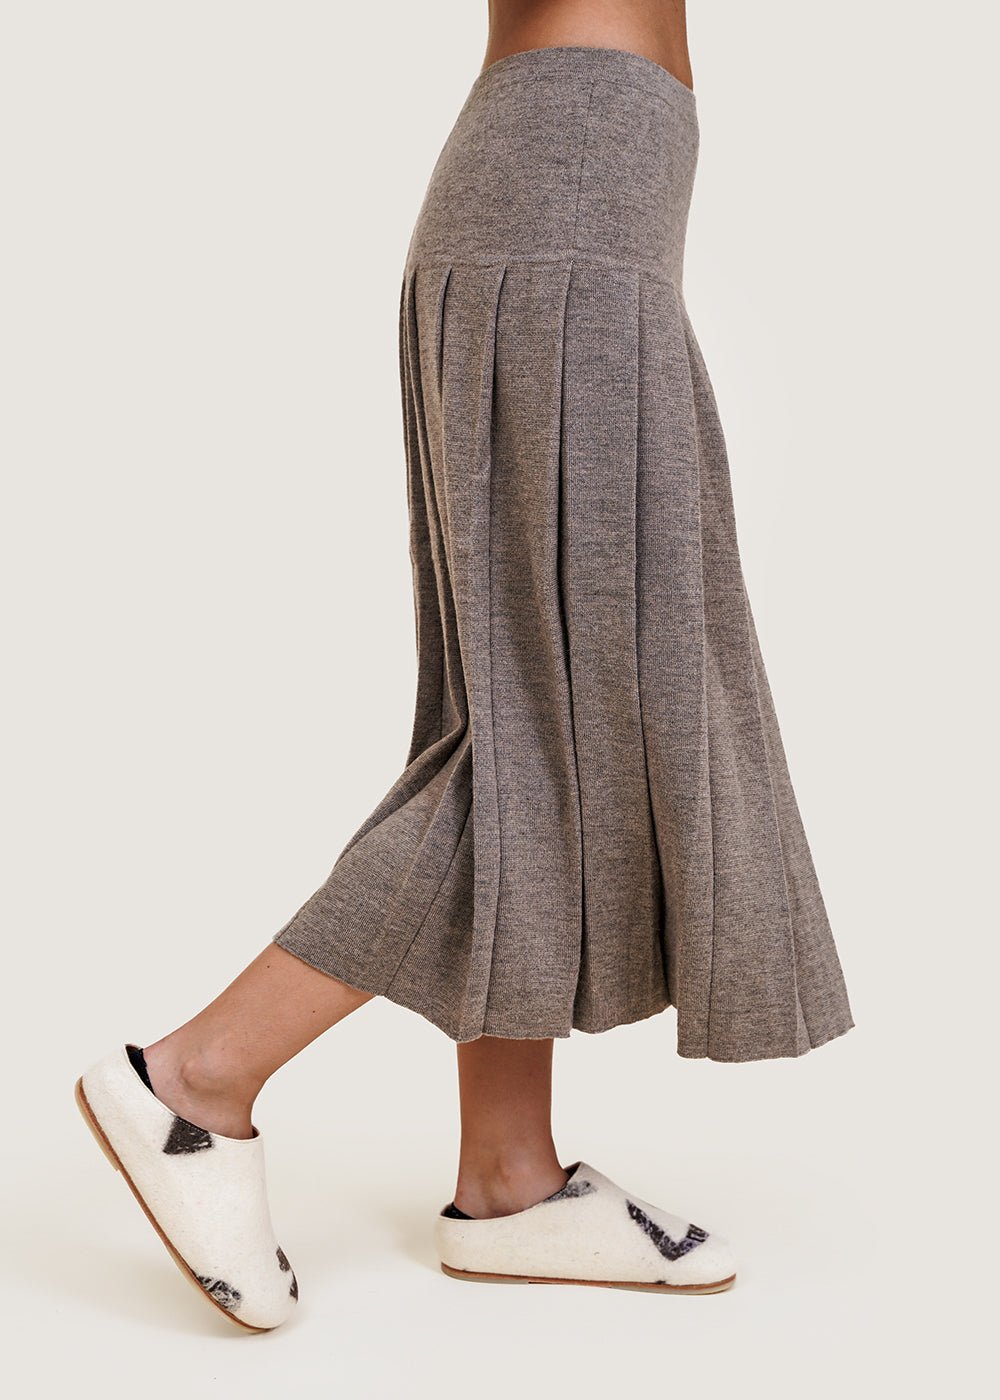 Lauren Manoogian Rock Pleat Skirt - New Classics Studios Sustainable Ethical Fashion Canada